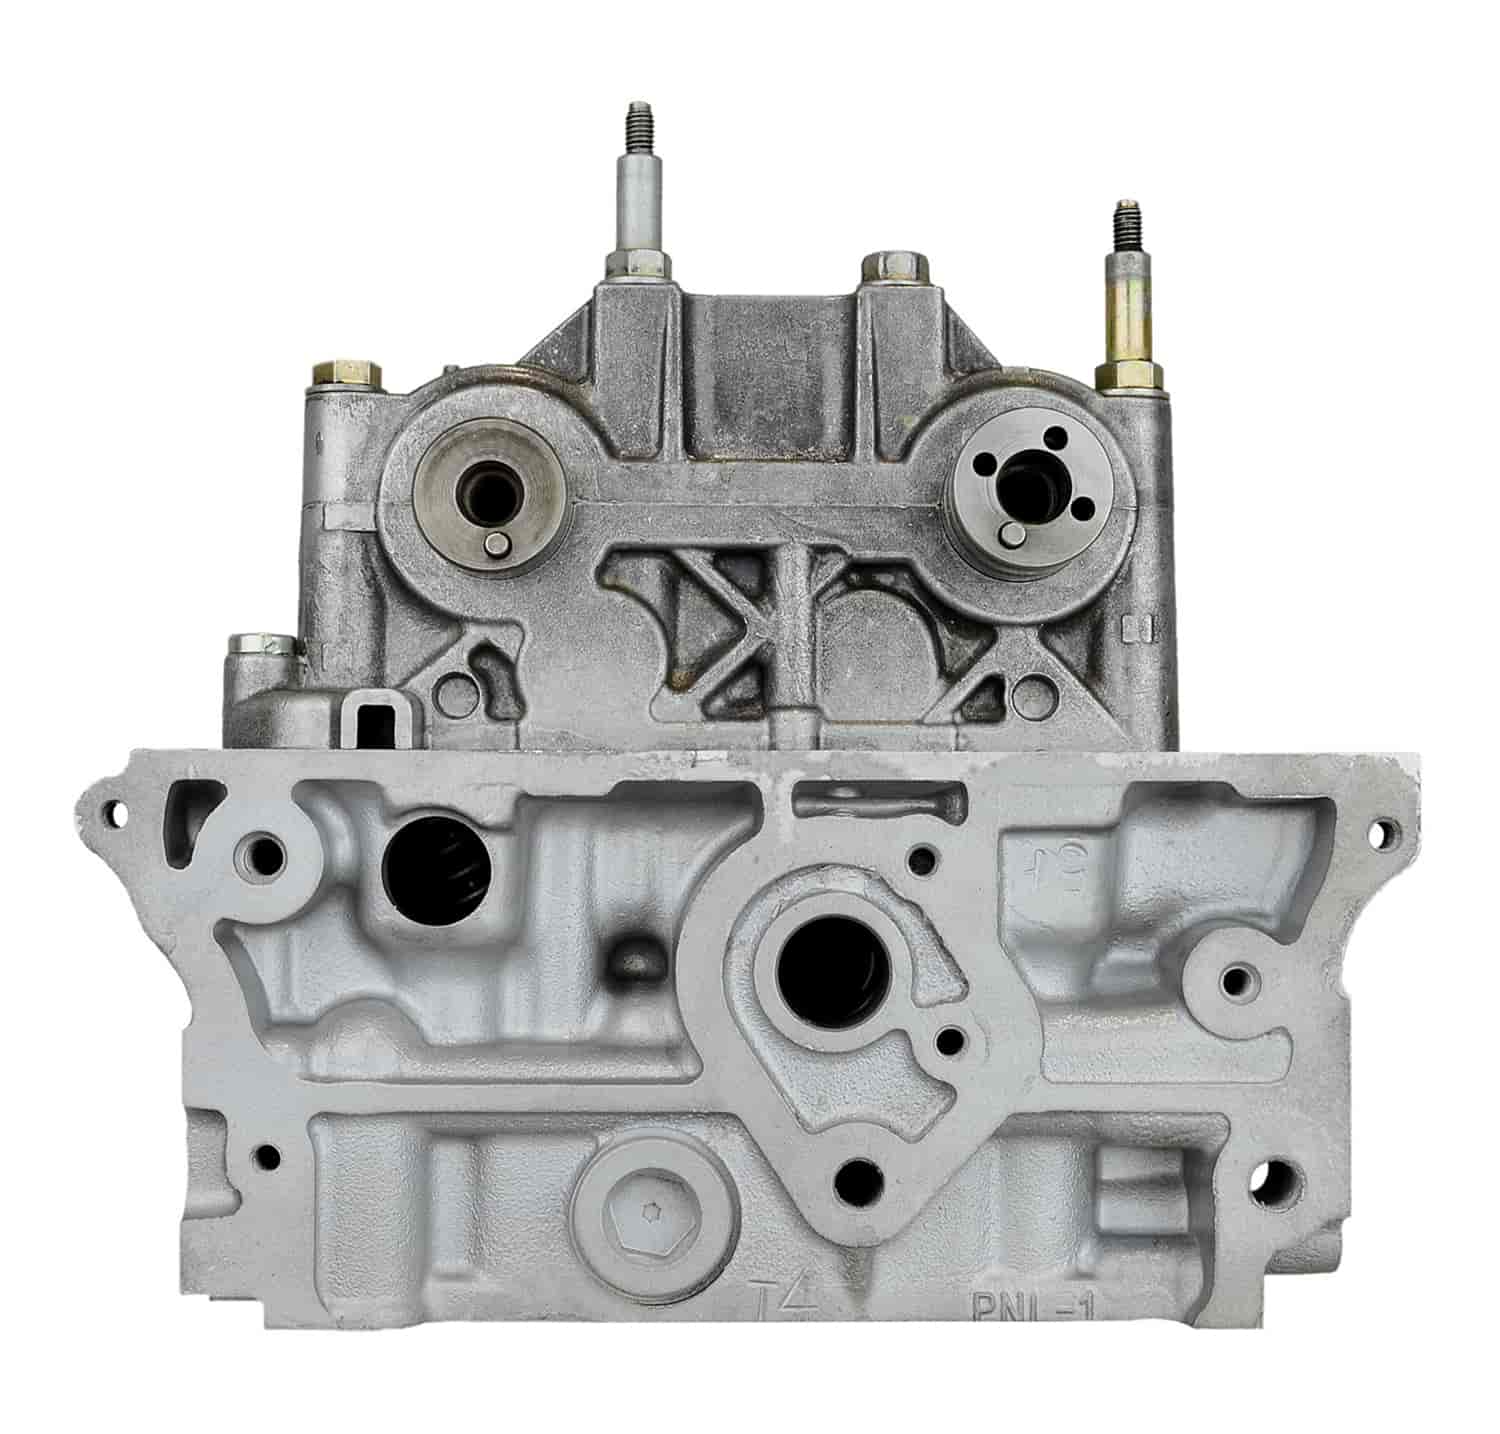 Remanufactured Cylinder Head for 2002-2006 Acura RSX & Honda Civic with 2.0L L4 K20A3